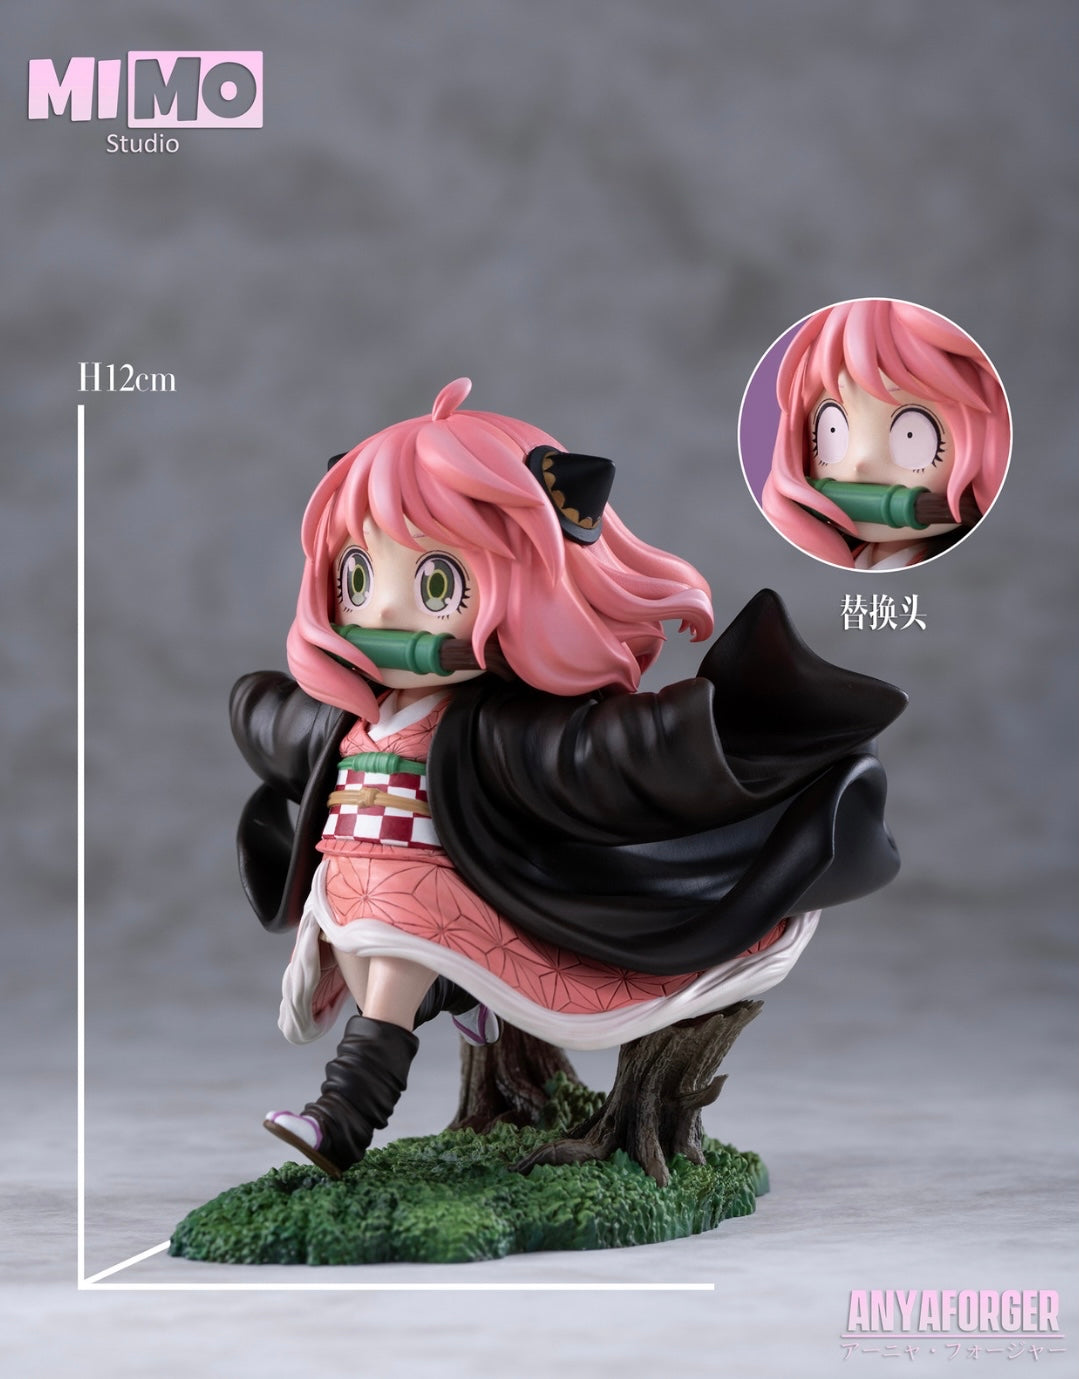 [PRE ORDER] Spy X Family - Mimo Studio Anya x Nezuko Cosplay (Price Does Not Include Shipping)